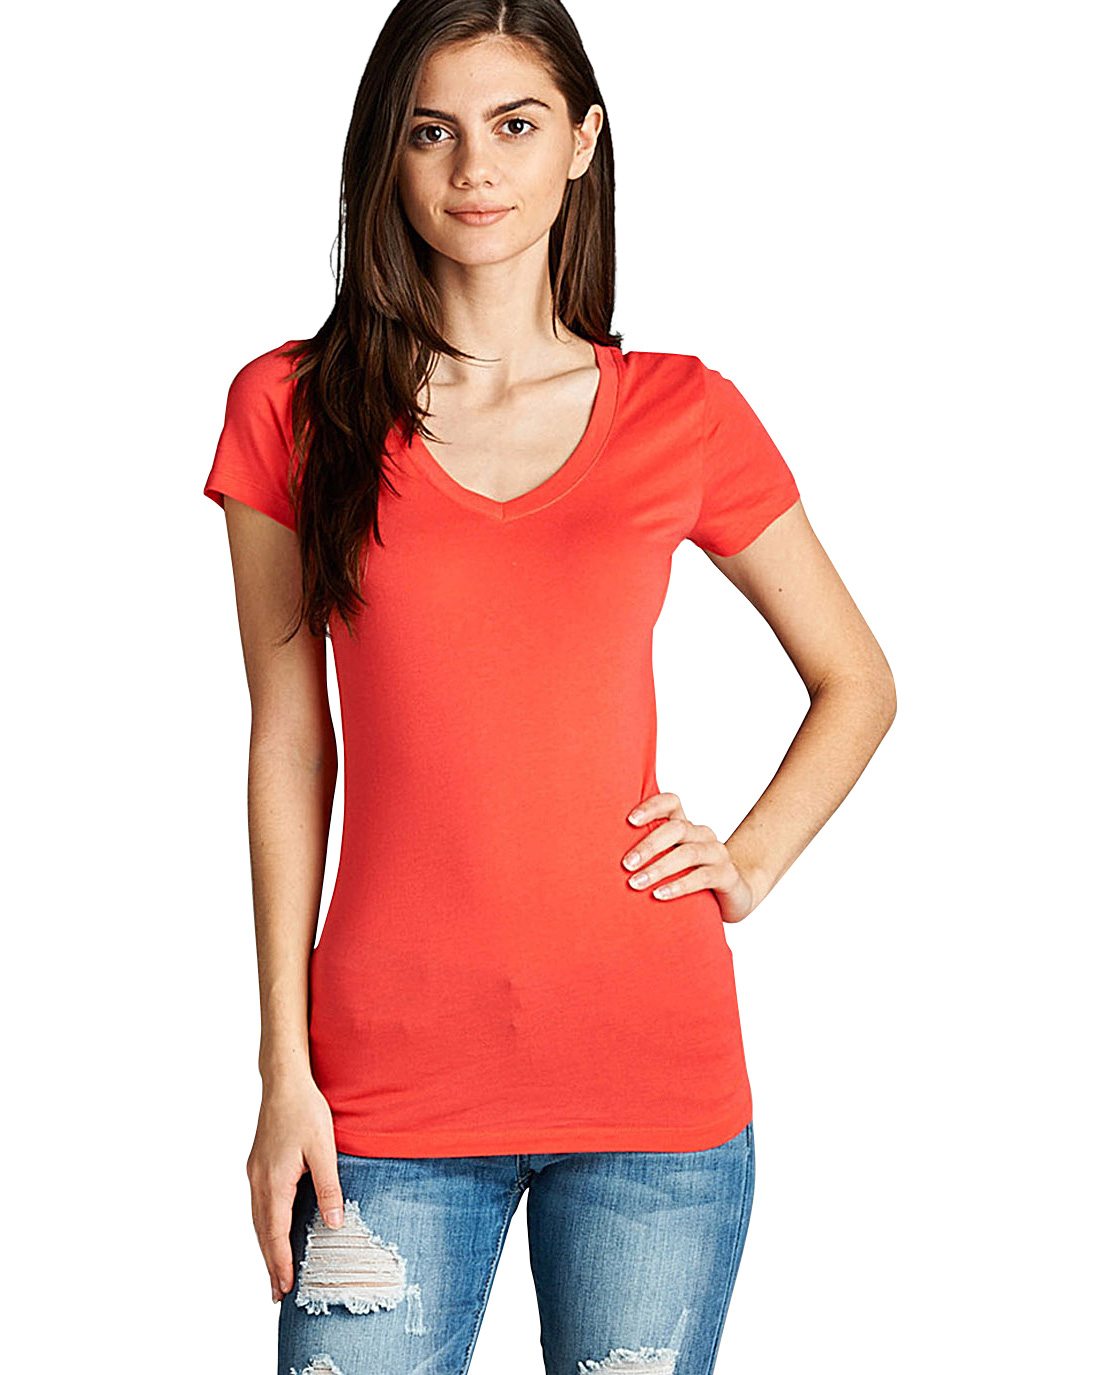 Stretchy short sleeves top